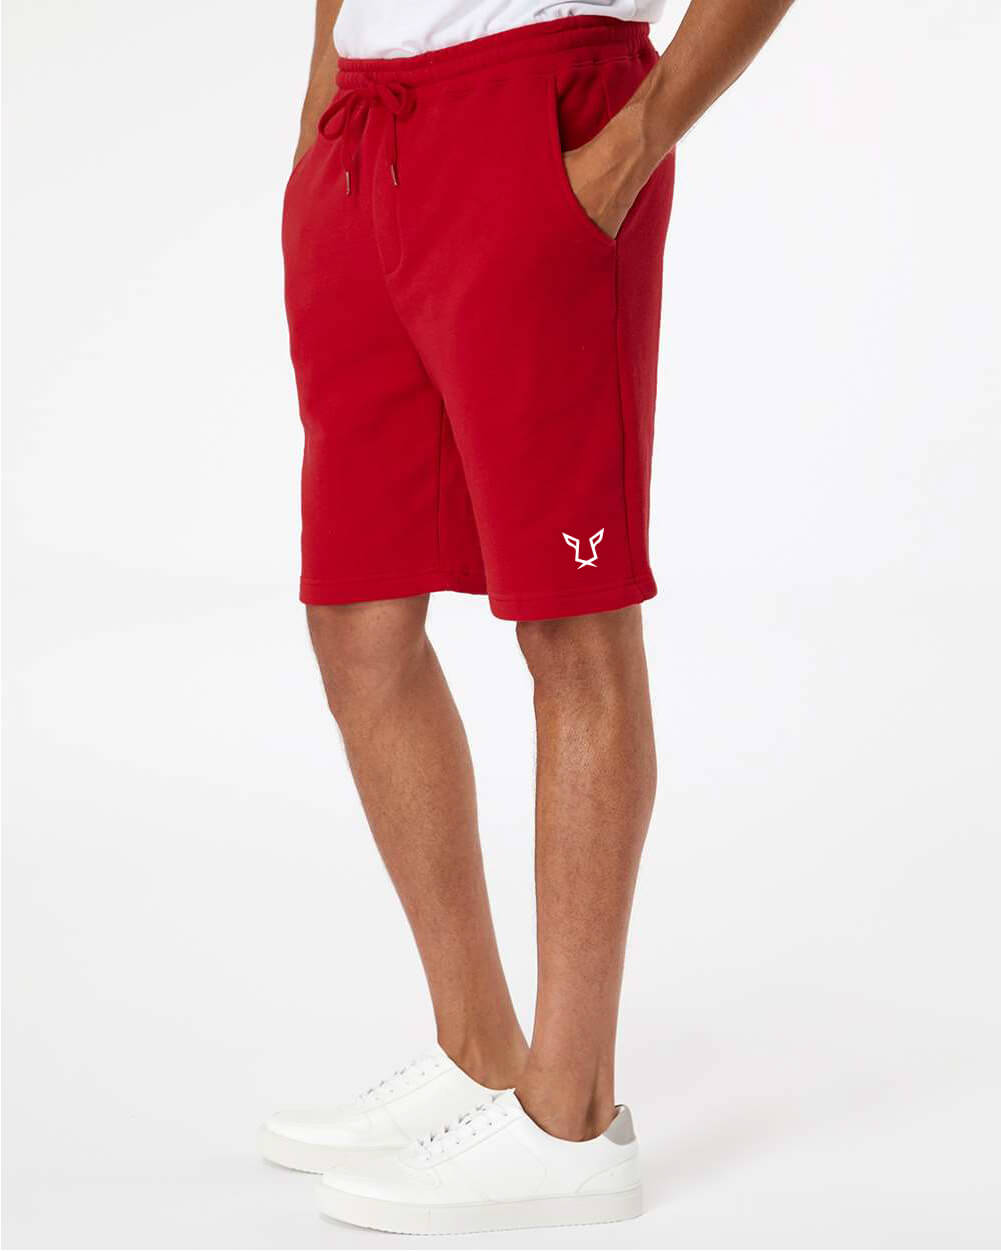 Men's Red Evolution Fleece Shorts by Odisi Apparel